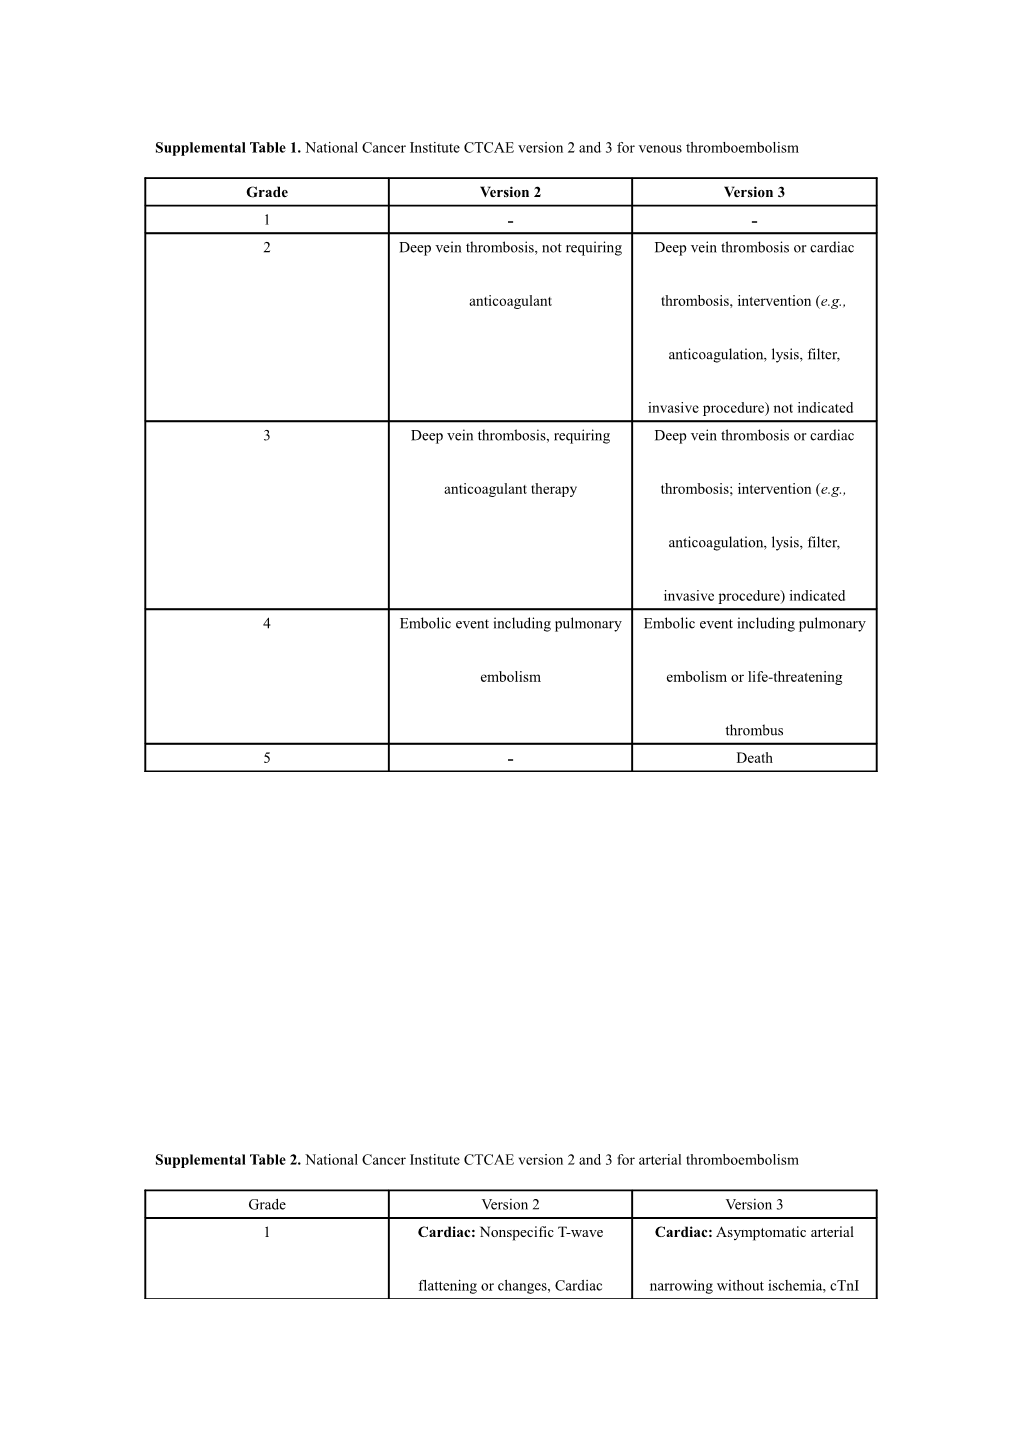 Supplemental Table 1. National Cancer Institute CTCAE Version 2 and 3 for Venous